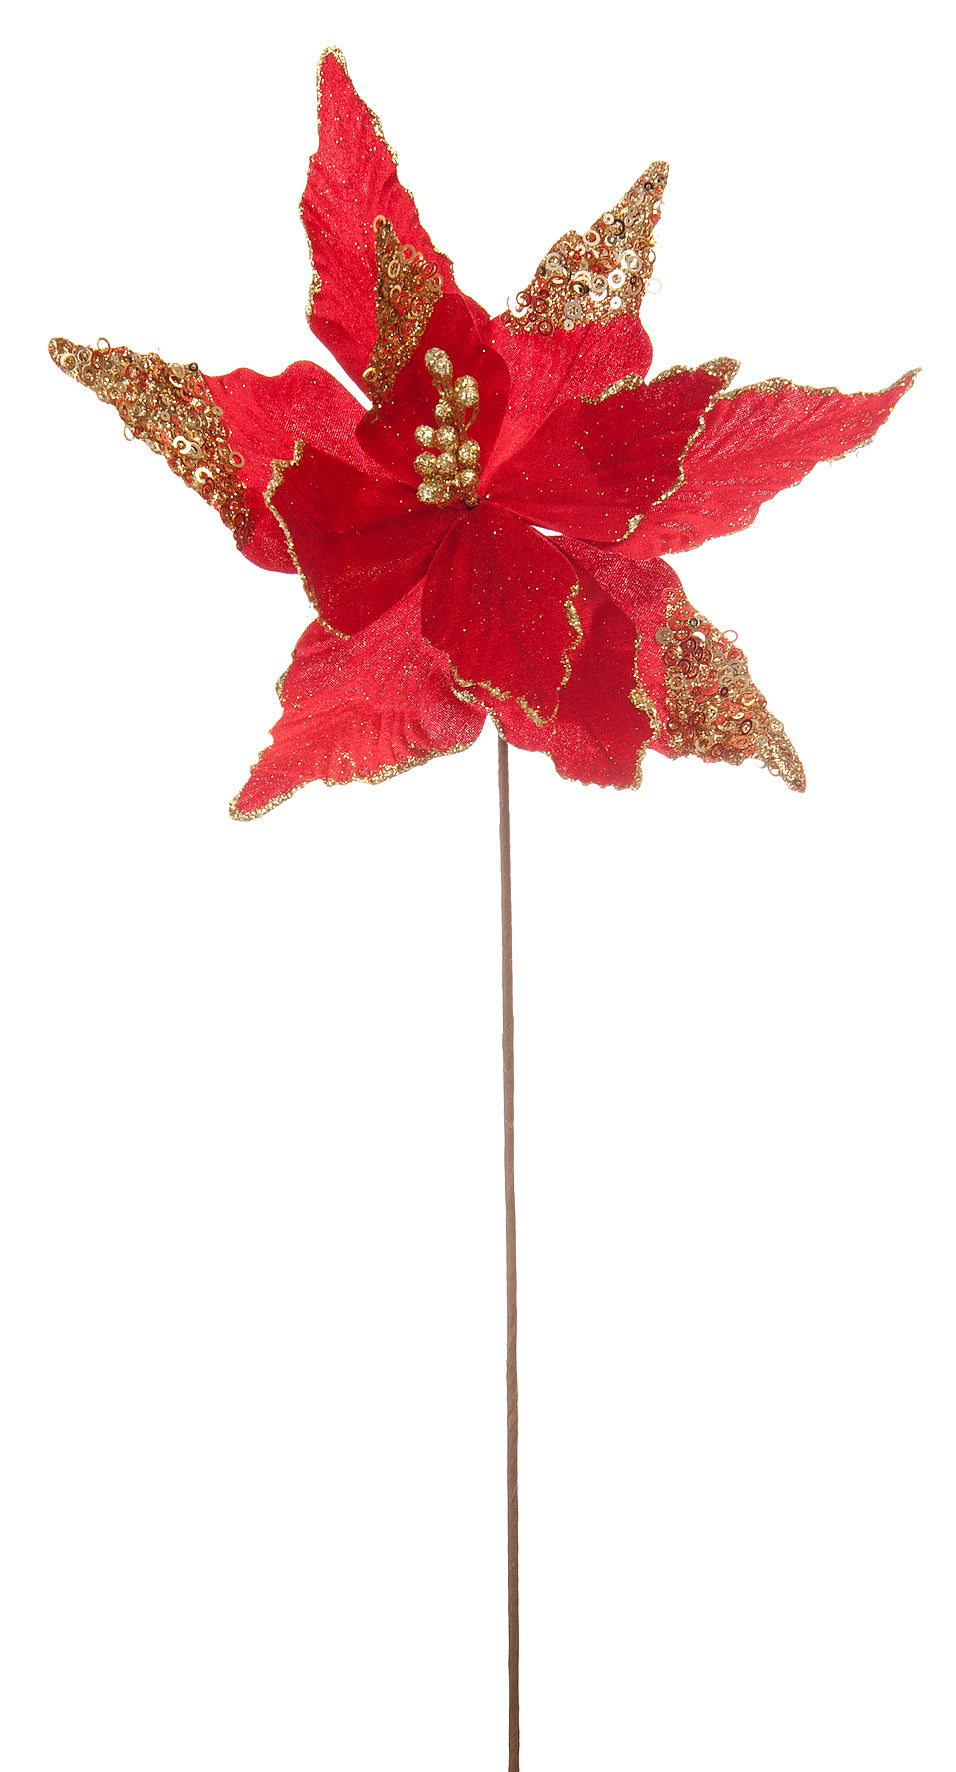 60cm Red Poinsettia with Glitter